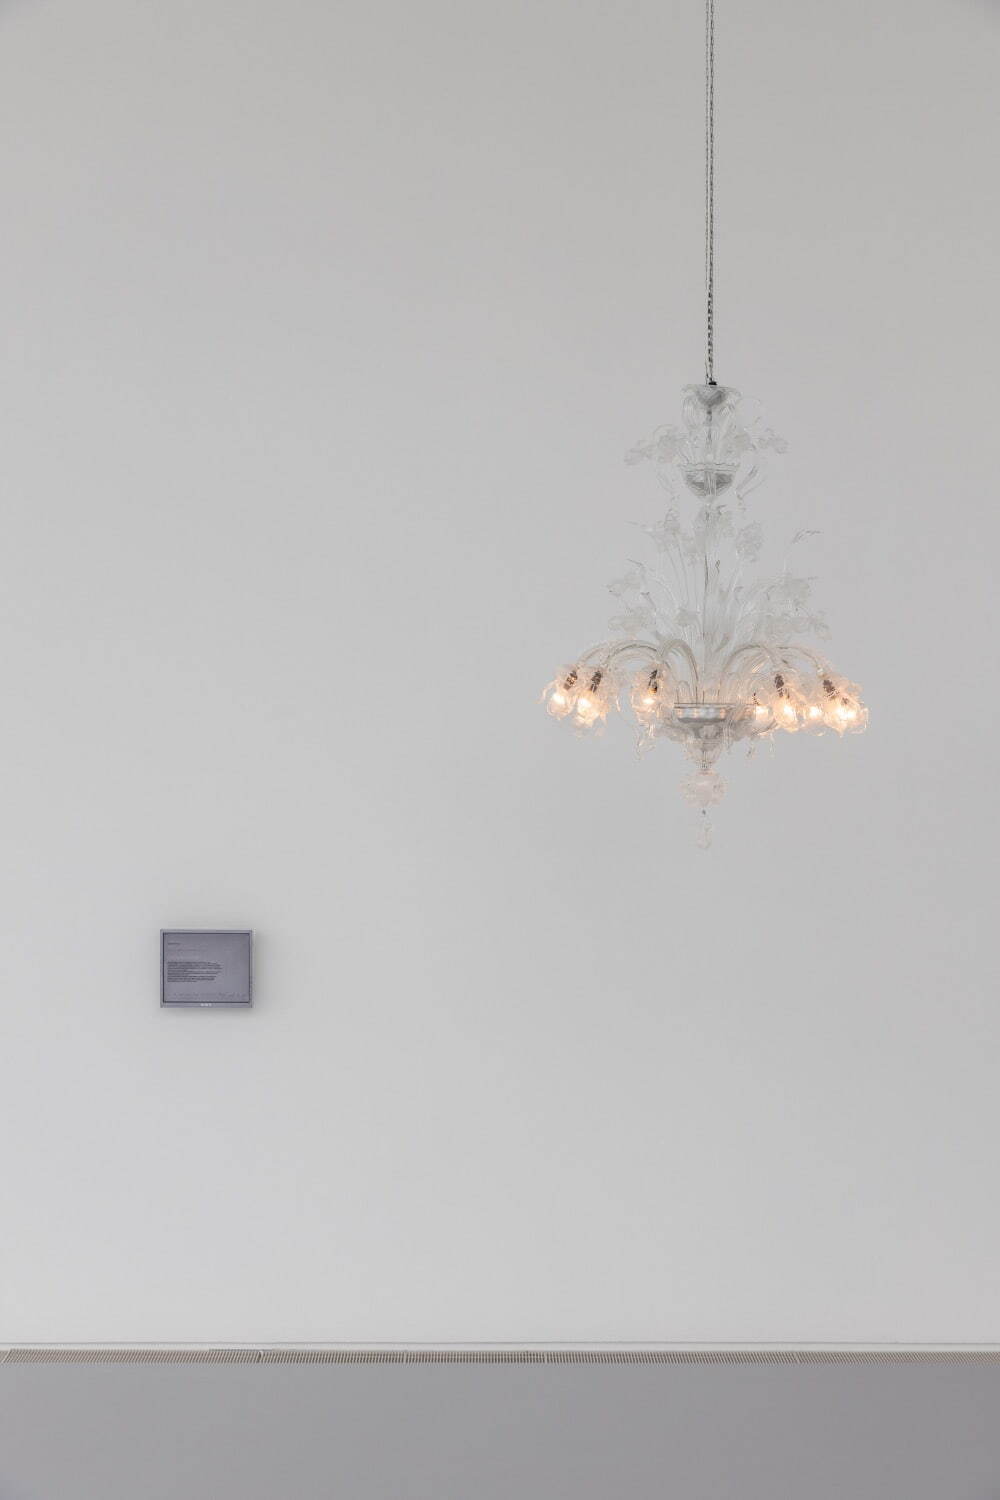 Cerith Wyn Evans - <i width="1000" height="1500">L><s>espace</s></i>)(... エスパス ルイ・ヴィトン東京での展示風景(2023年)
《"Lettre à Hermann Scherchen" from 